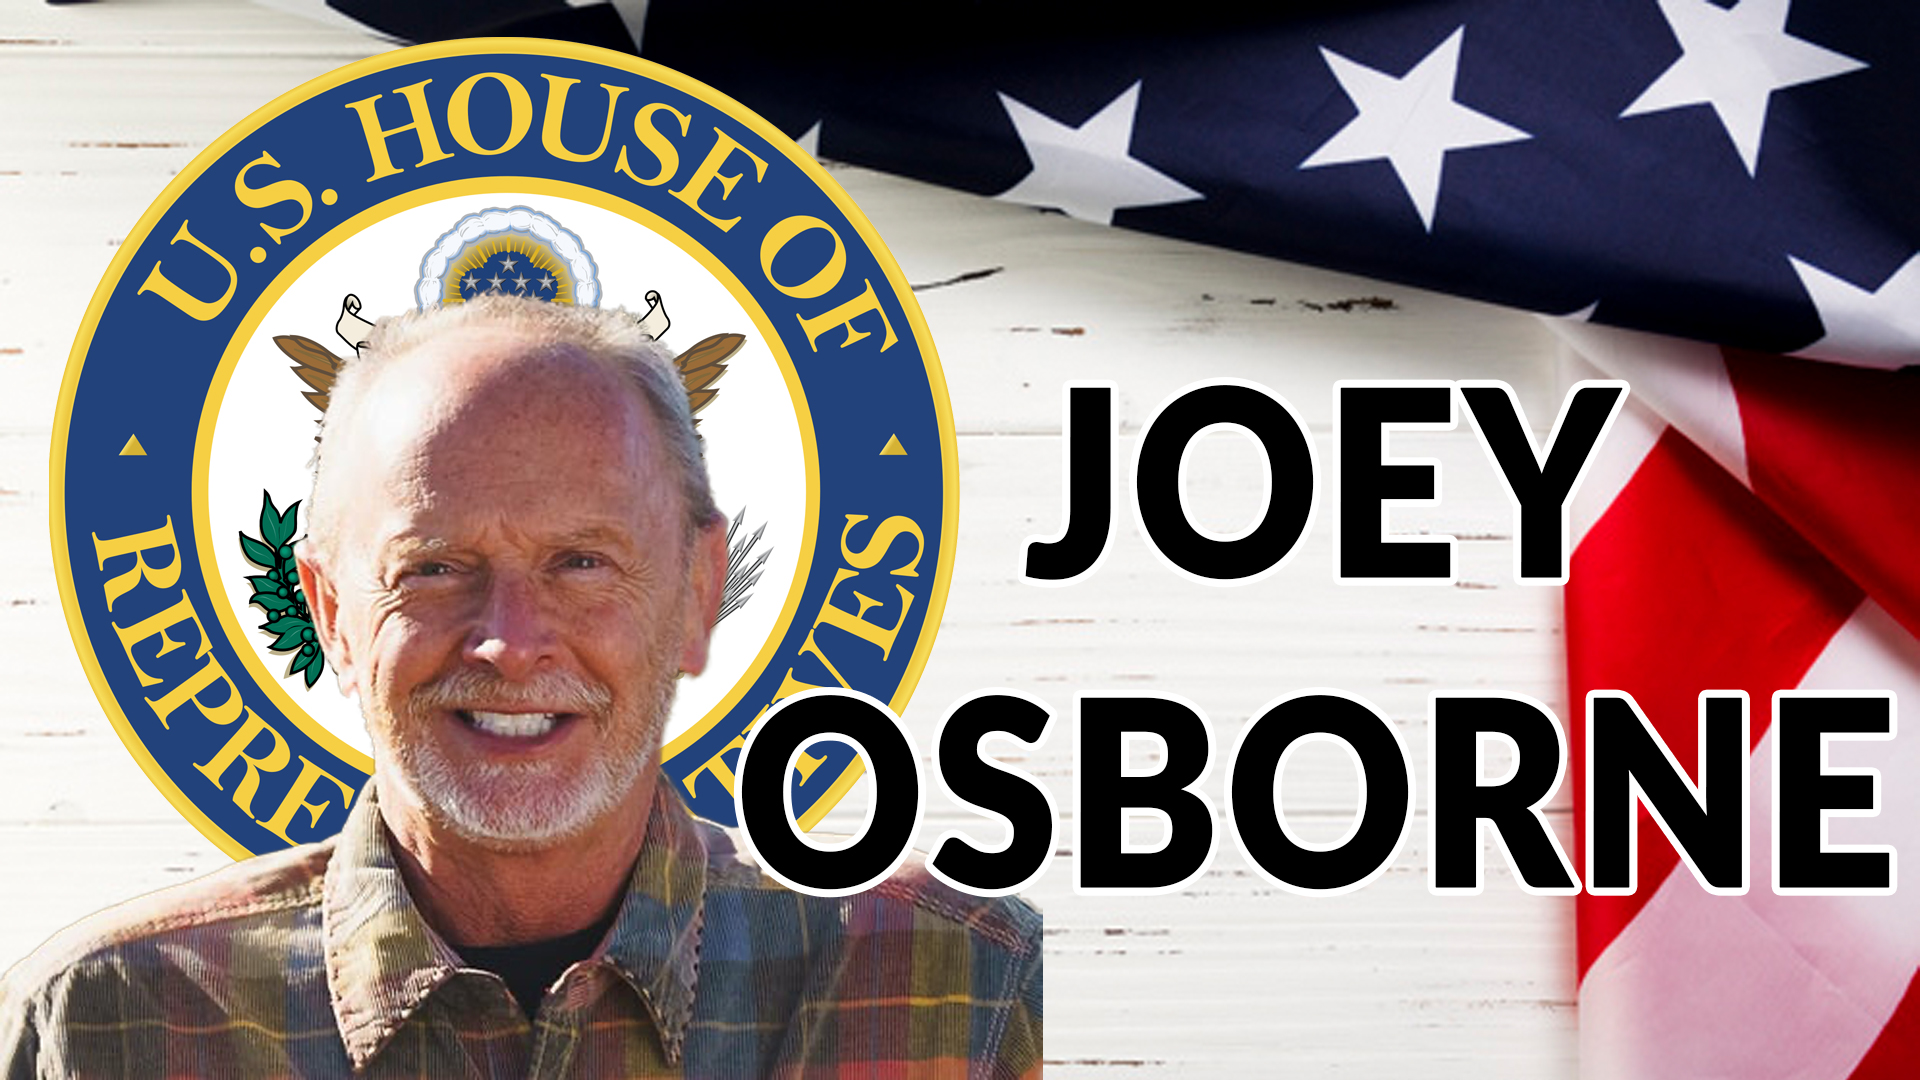 You are currently viewing JOEY OSBORNE FOR US HOUSE OF REPRESENTATIVES | AREN 145